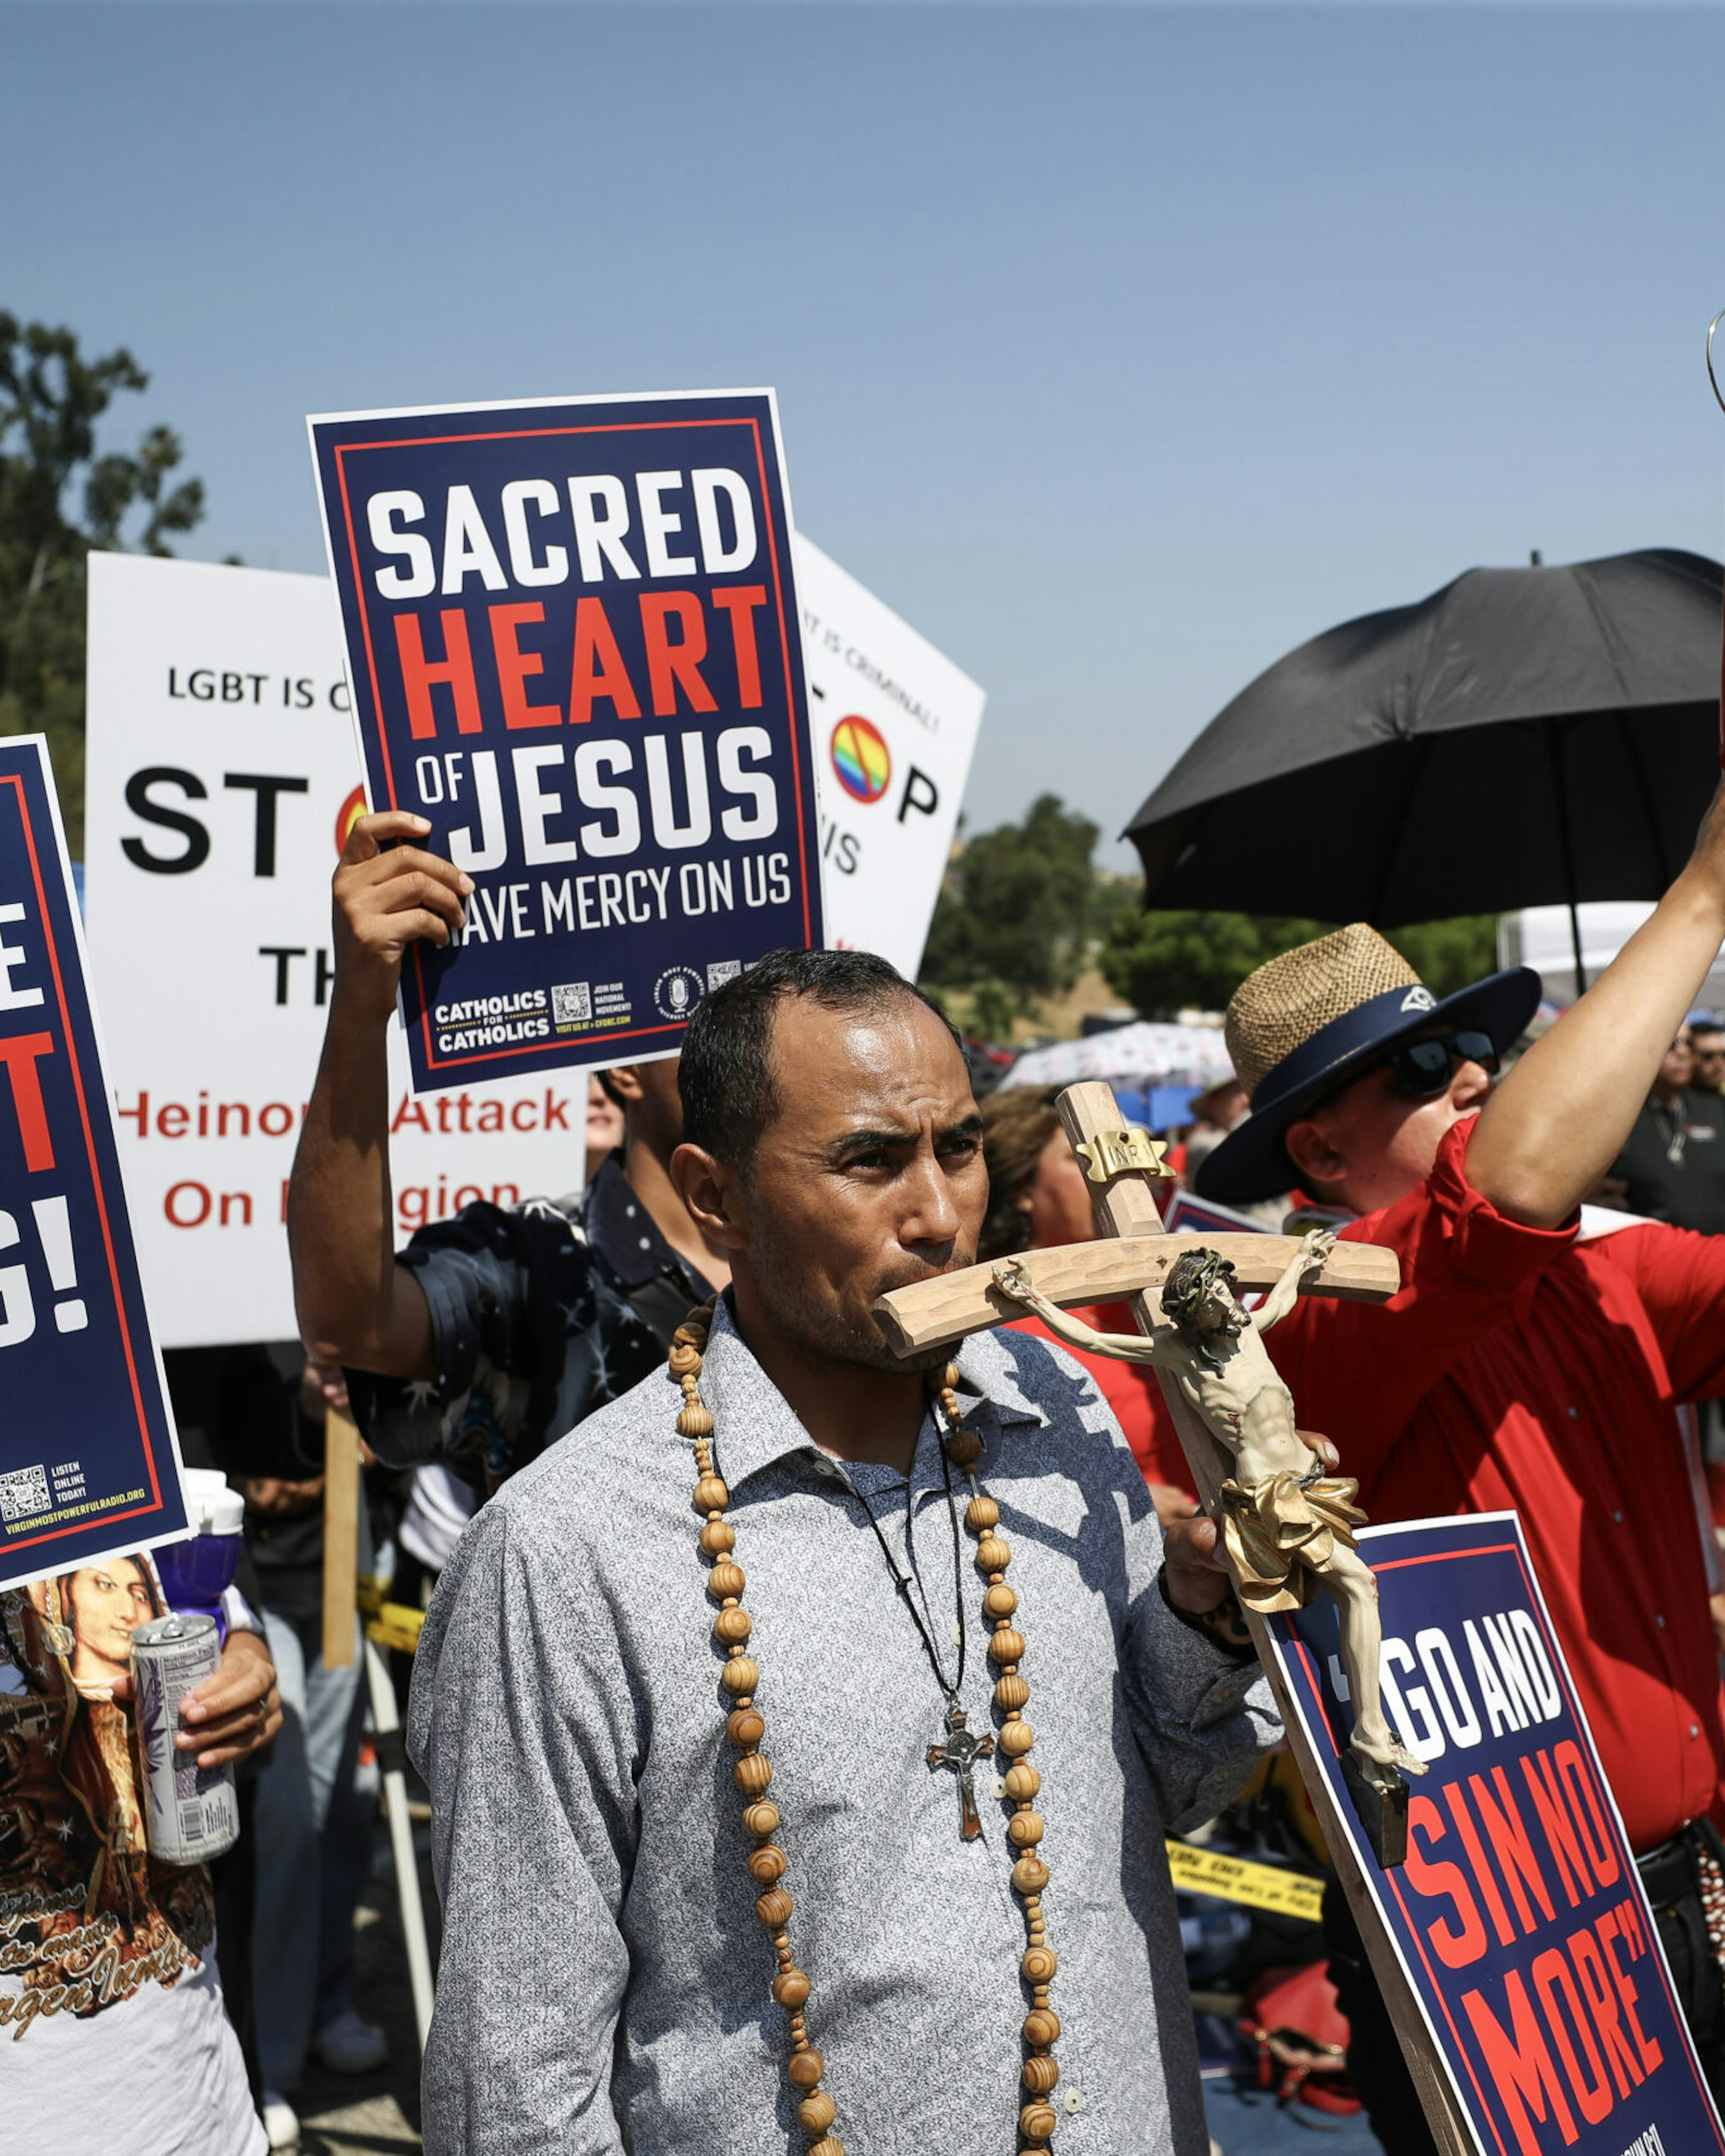 LOS ANGELES, CALIFORNIA - JUNE 16: Protesters hold signs at a Catholics for Catholics event in response to the Dodgers' Pride Night event including the Sisters of Perpetual Indulgence, before the game between the Los Angeles Dodgers and the San Francisco Giants at Dodger Stadium on June 16, 2023 in Los Angeles, California. (Photo by Meg Oliphant/Getty Images)